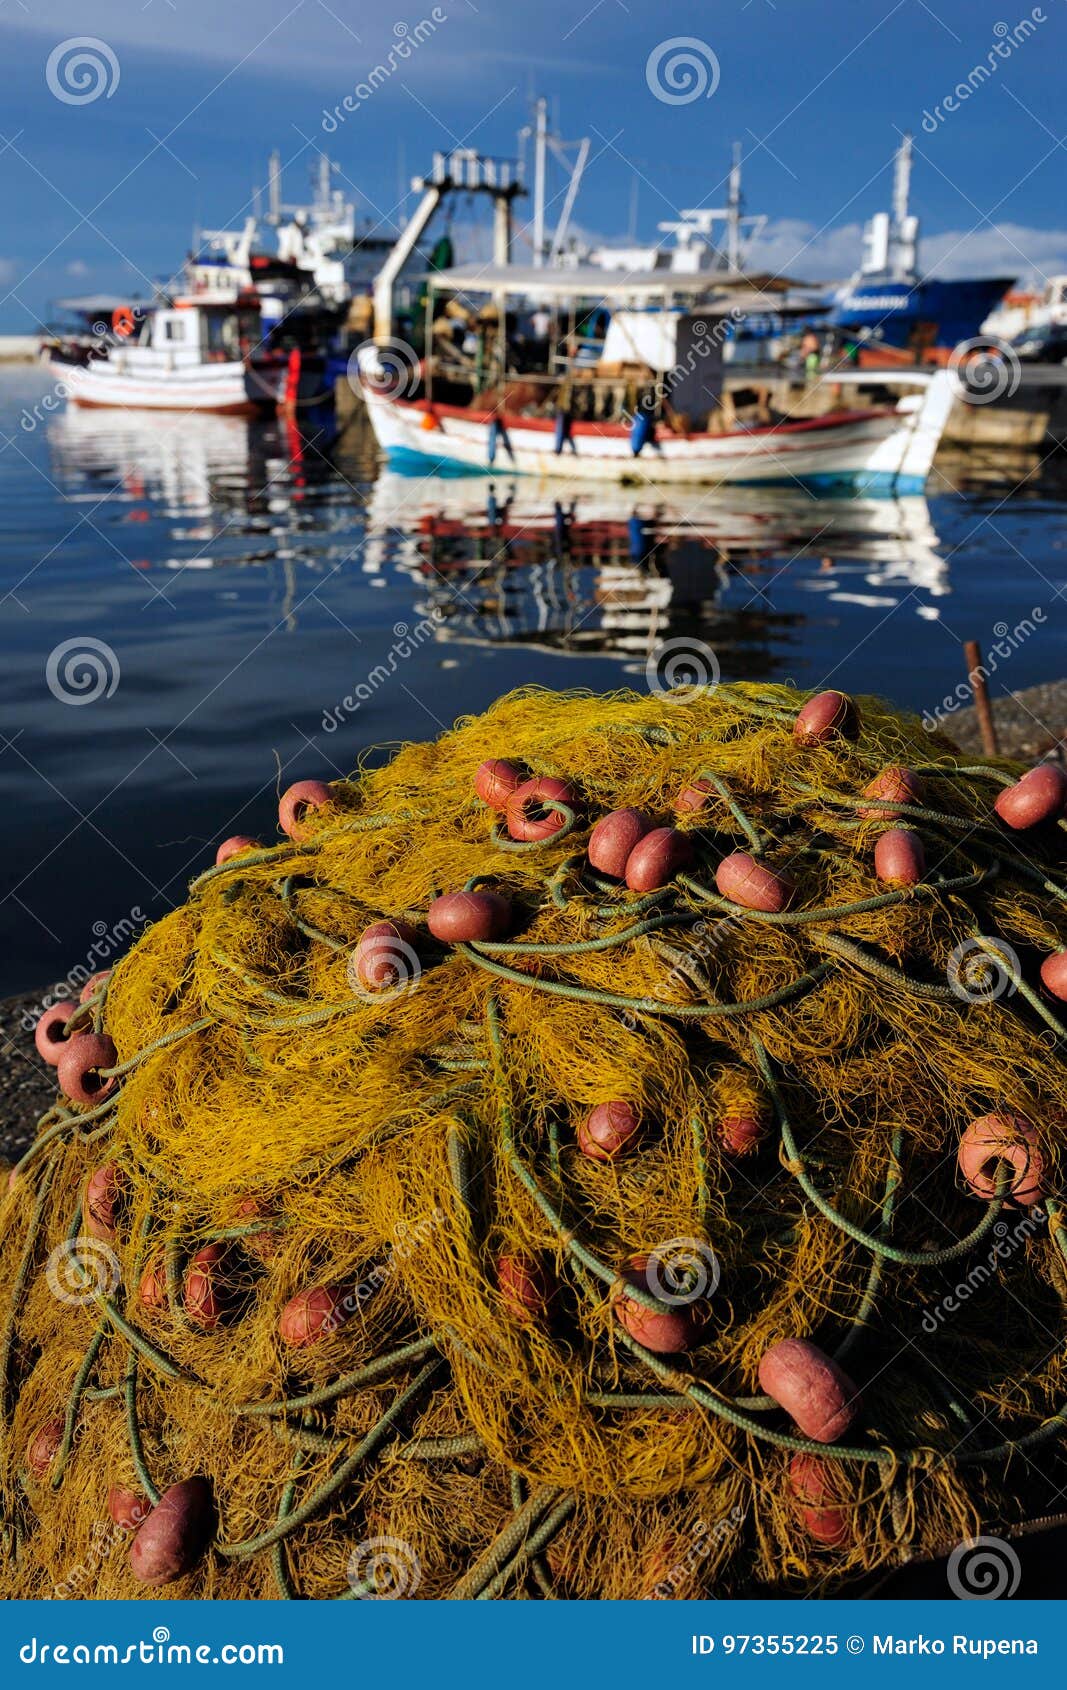 Trammel for Fishing Near the Sea Stock Image - Image of fishing, boat:  97355225